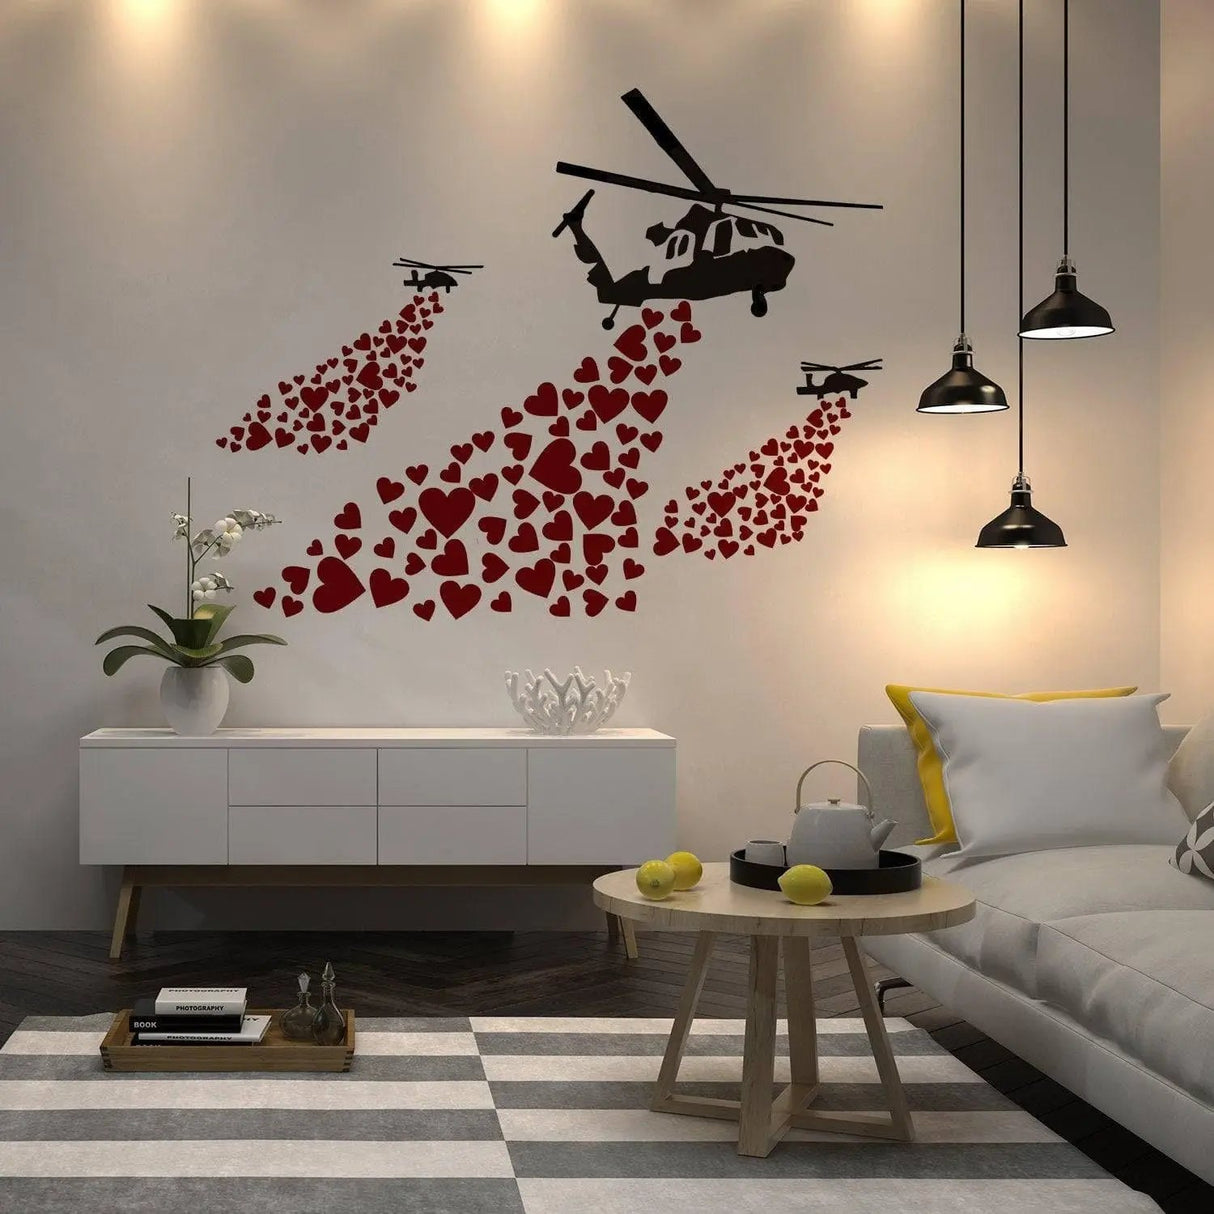 Banksy Vinyl Wall Decal Helicopter with Hearts - Street Art Graffiti Helicopters Decor Sticker - Heart Love Mural Boys Room Decor Artwork - Decords